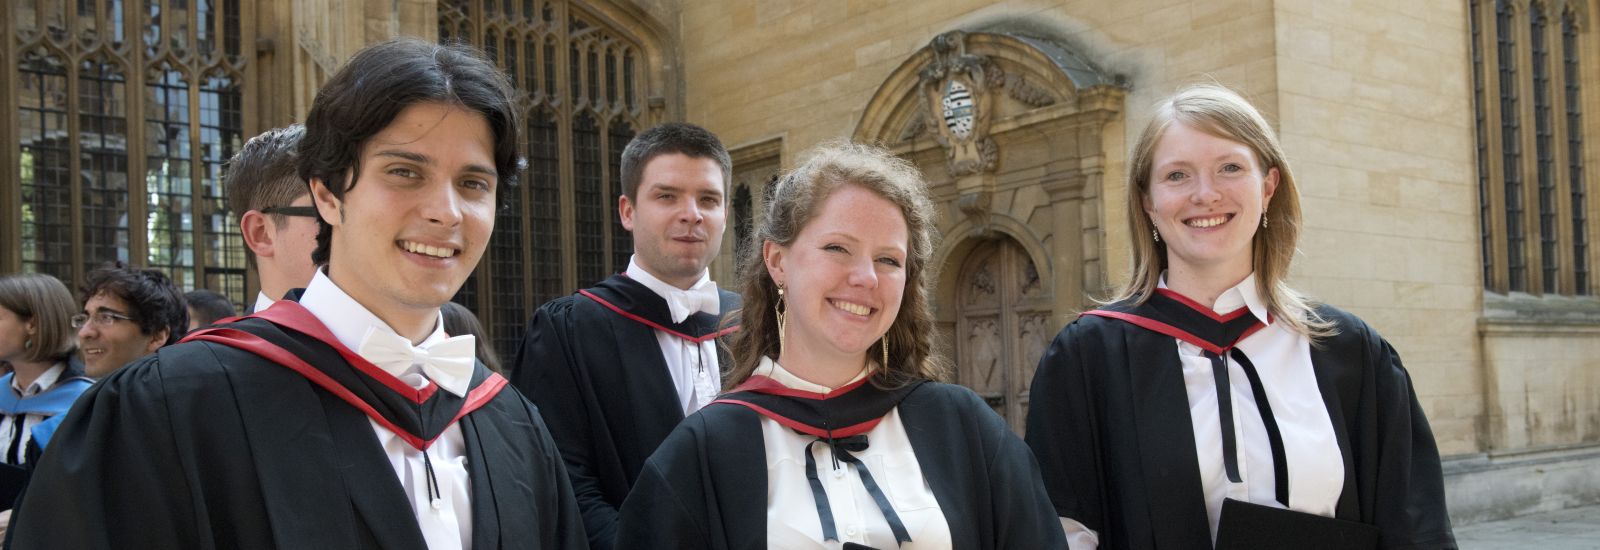 oxford law phd students